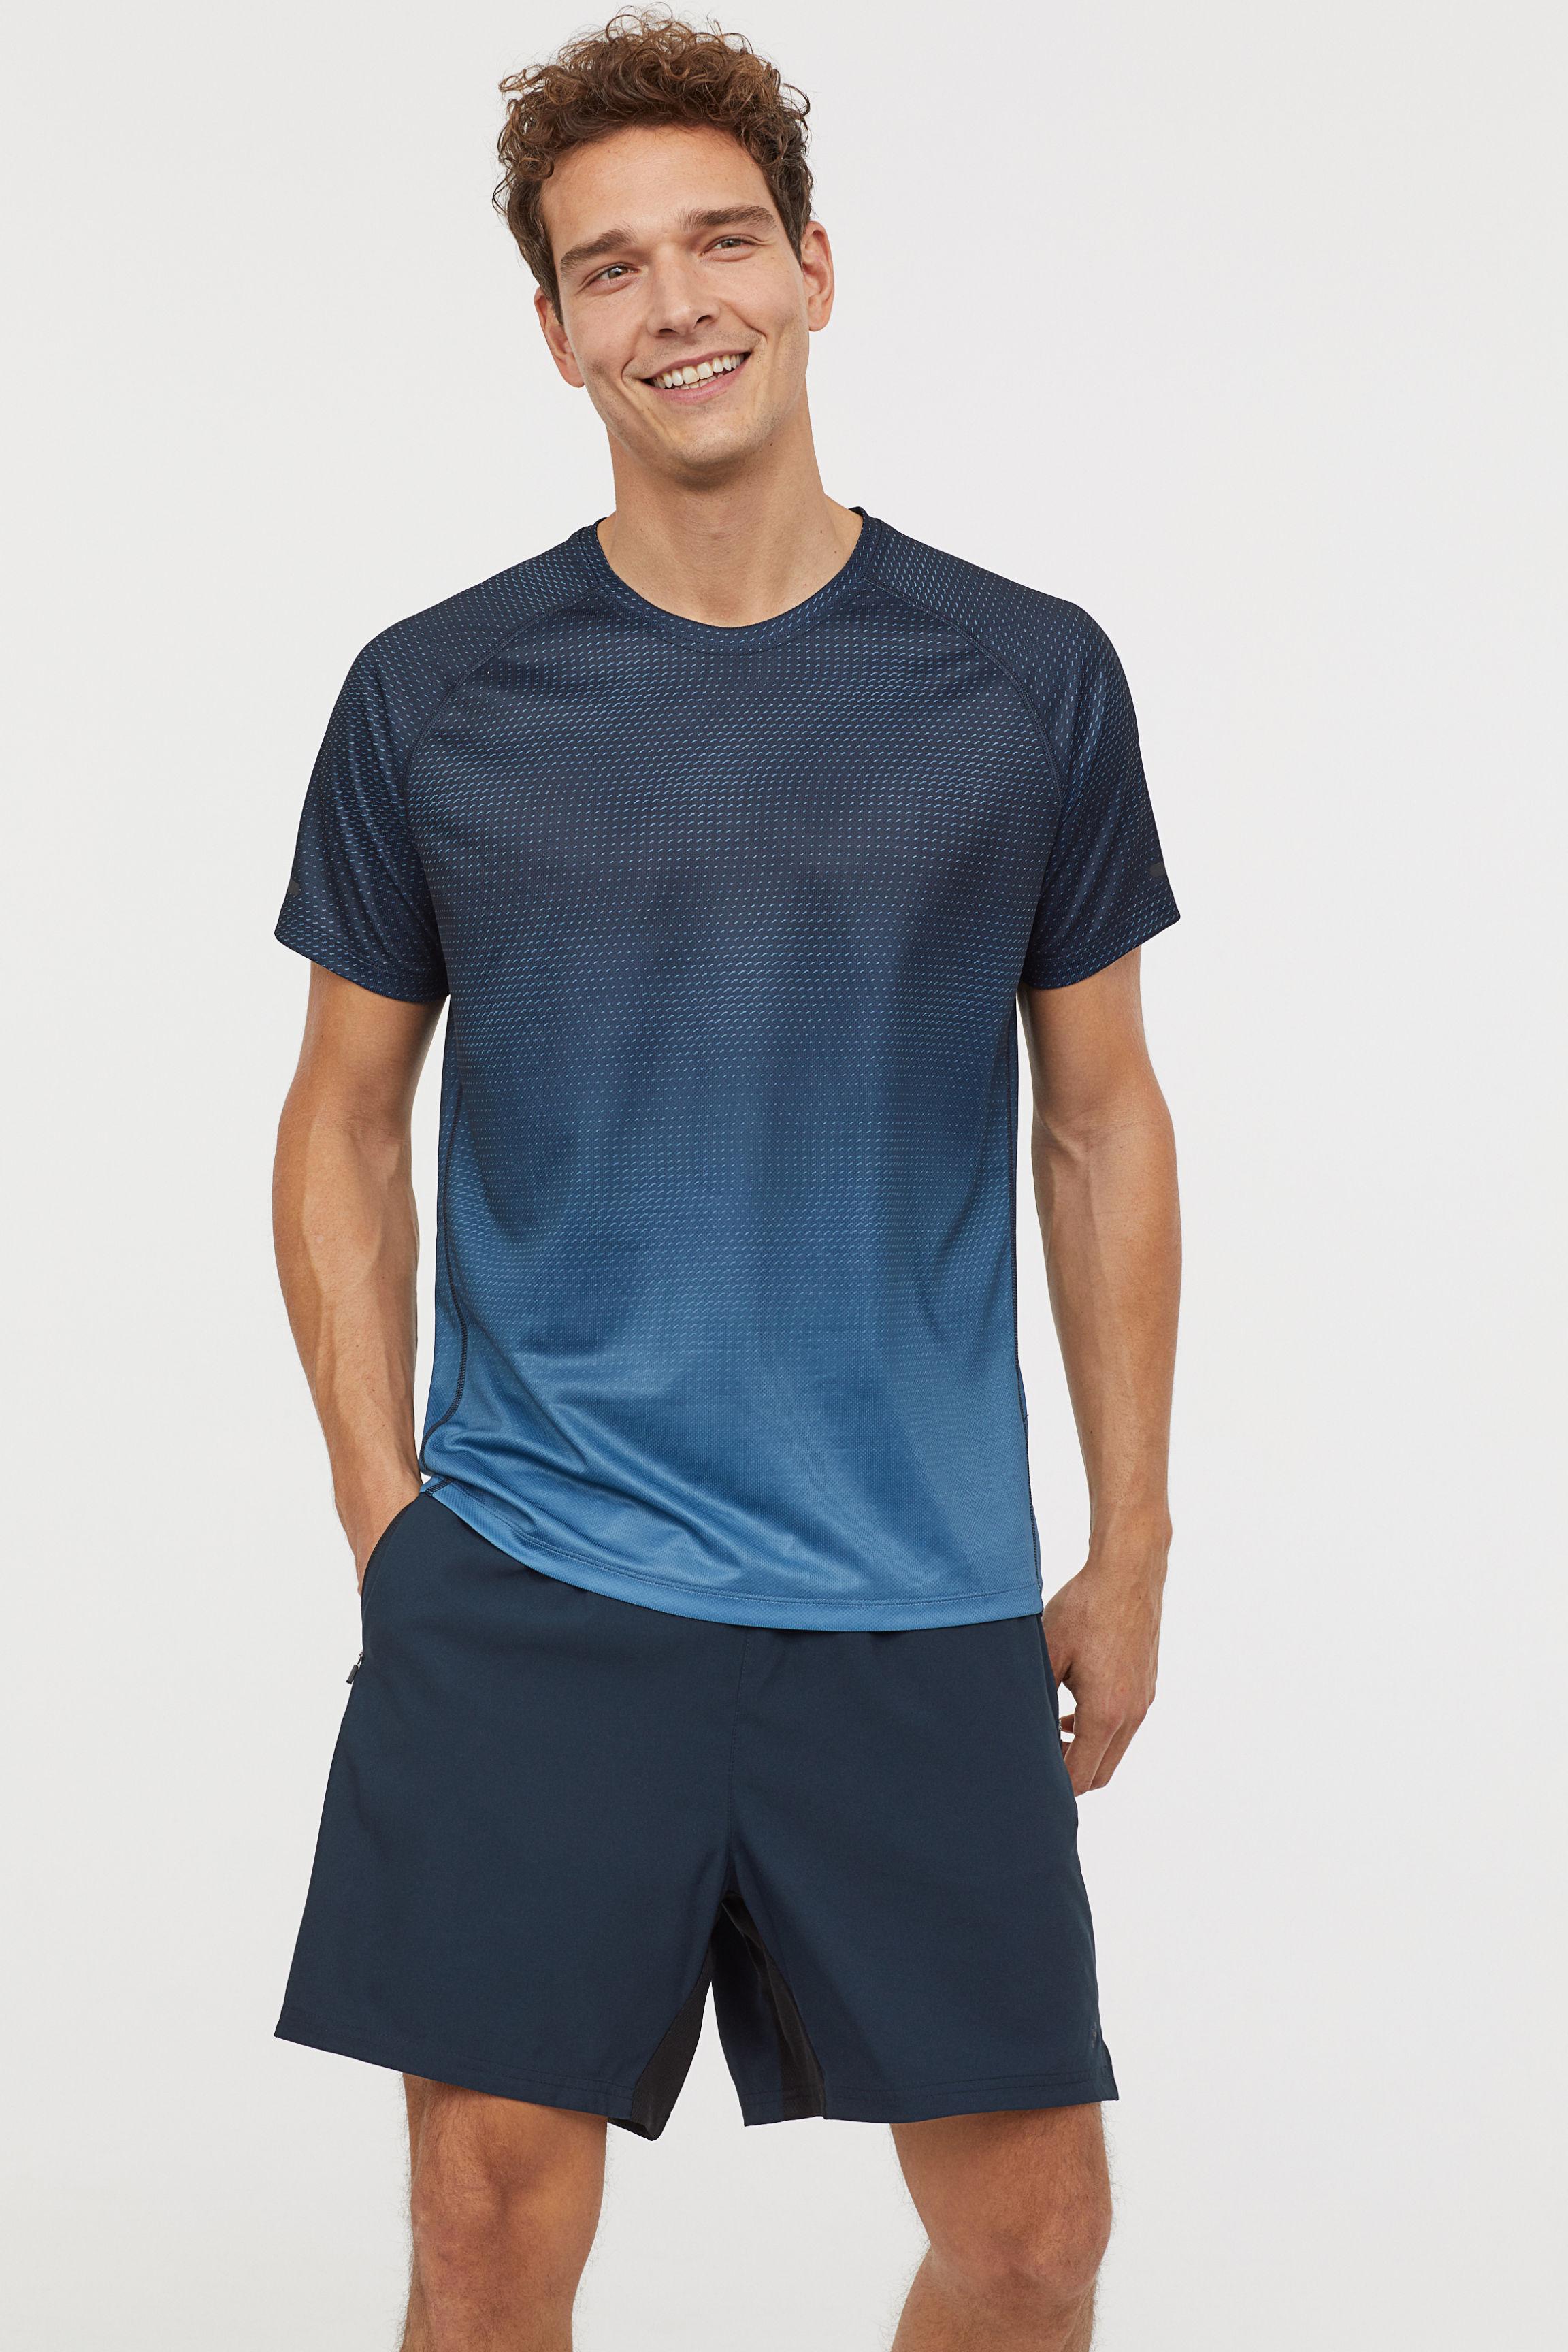 Lyst - H&M Running Shorts in Blue for Men